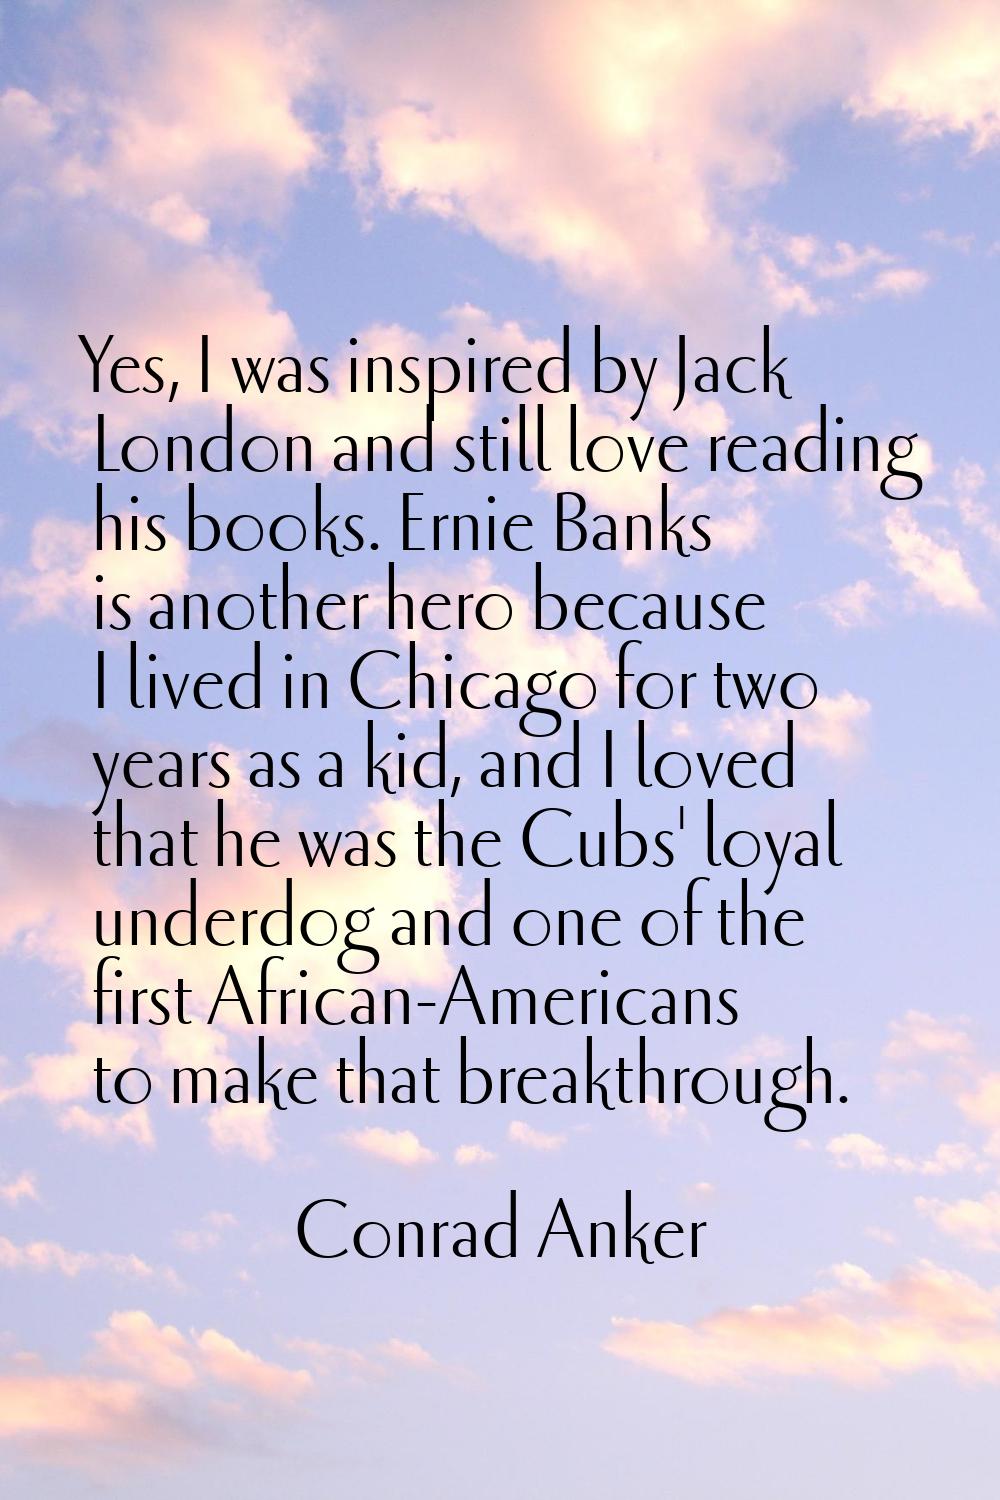 Yes, I was inspired by Jack London and still love reading his books. Ernie Banks is another hero be